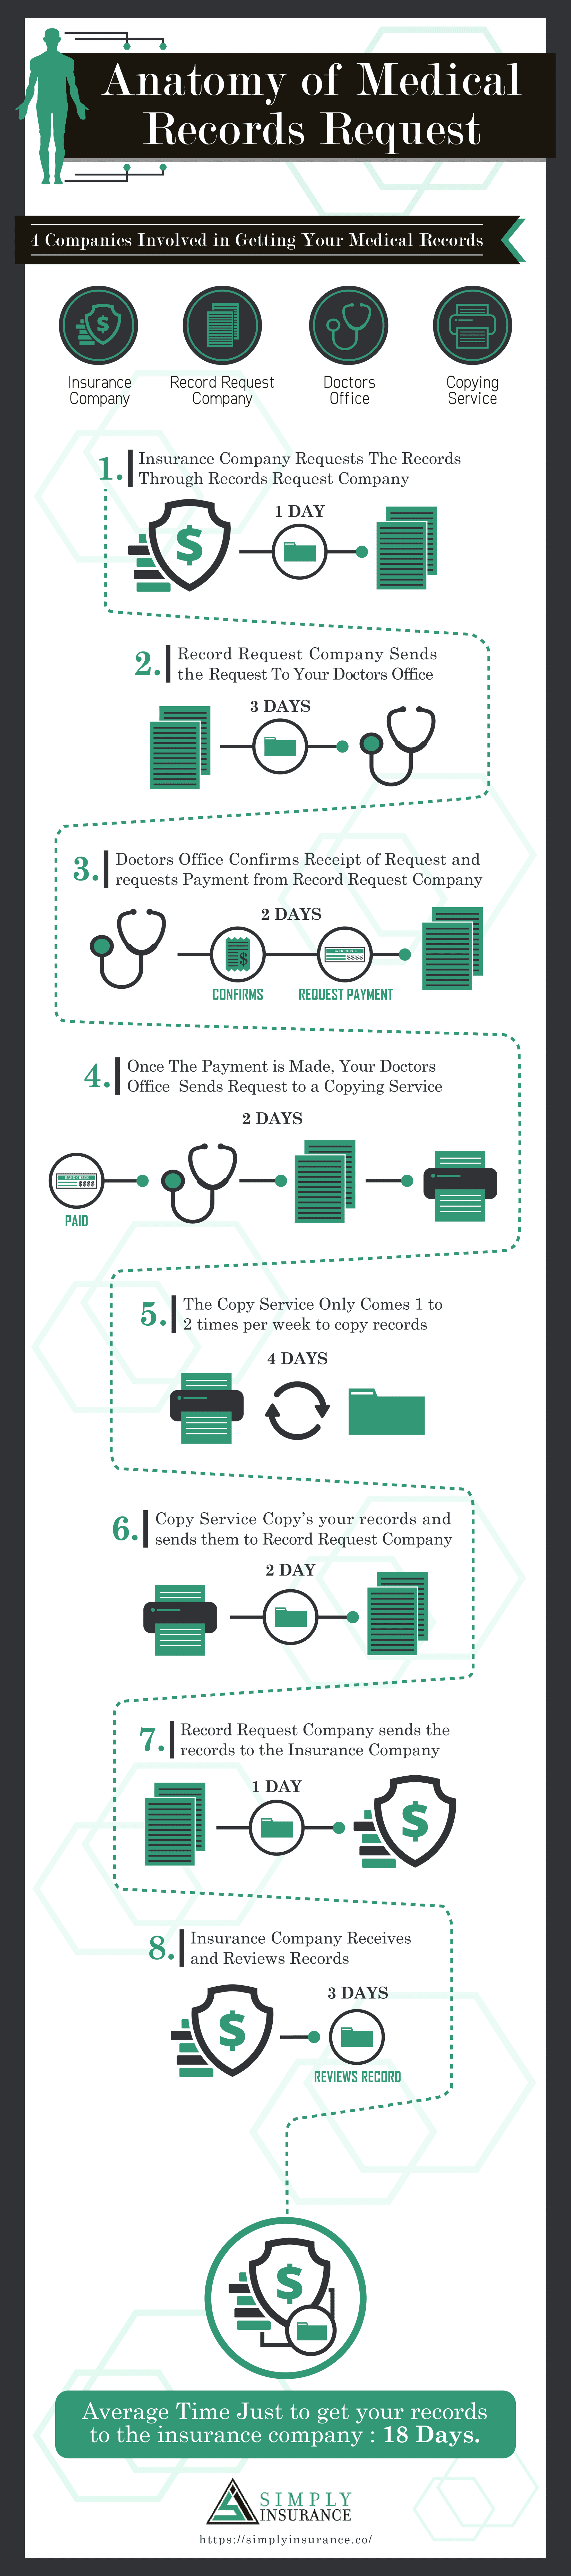 anatomy of a medical records request